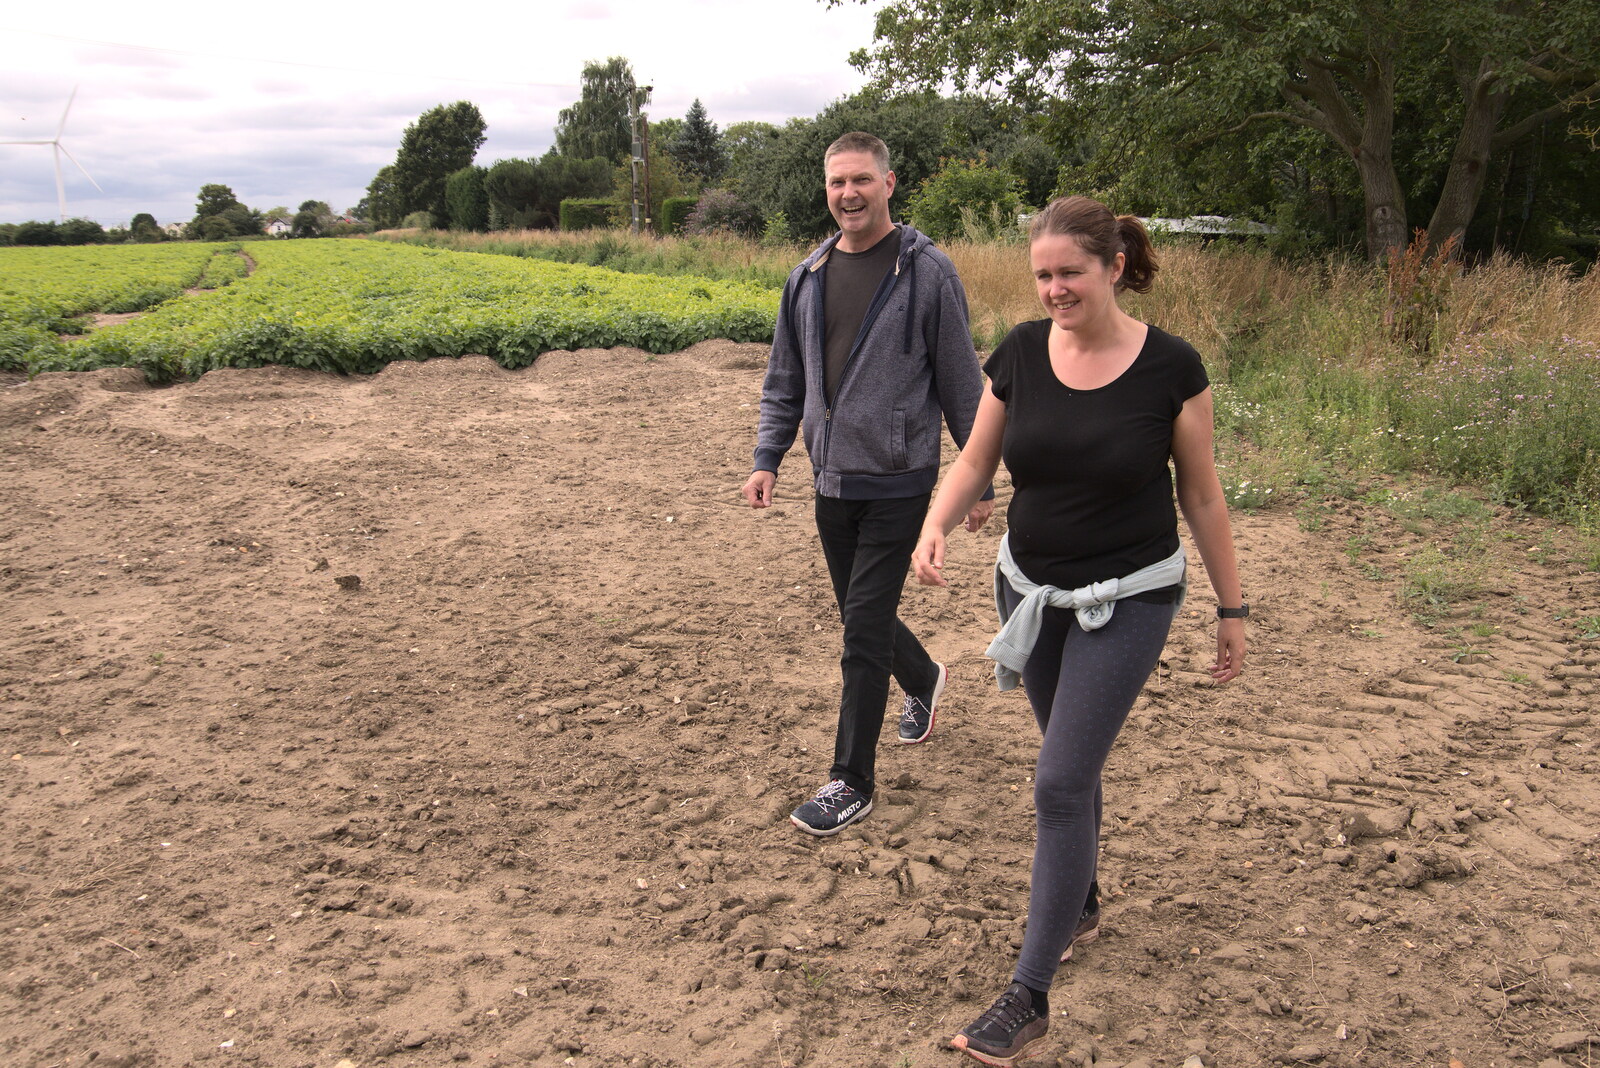 Sean and Isobel stride across the fields from Meg-fest, and Sean Visits, Bressingham and Brome, Suffolk - 1st August 2021